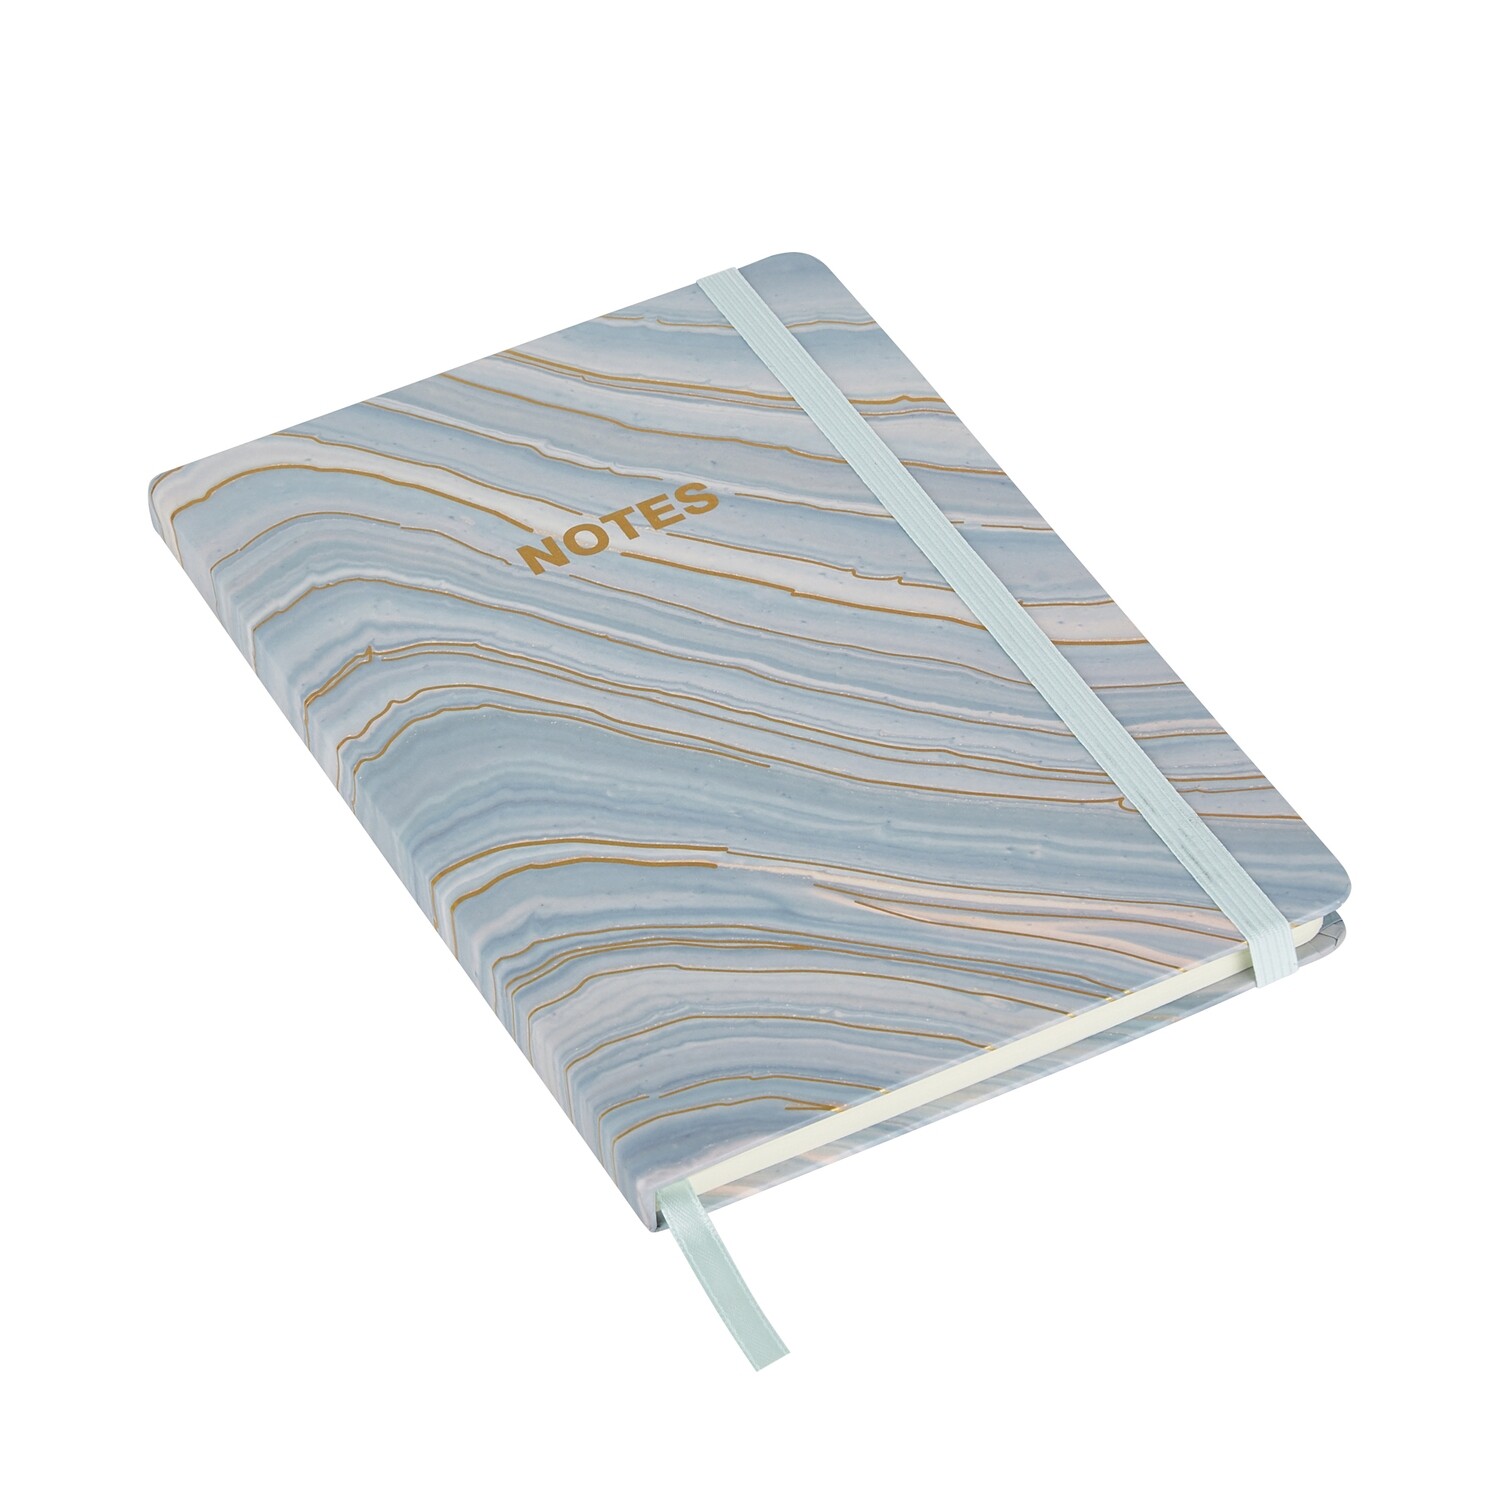 Gradient Growth Rings - Hardbound Lined Journal A5 Notebook